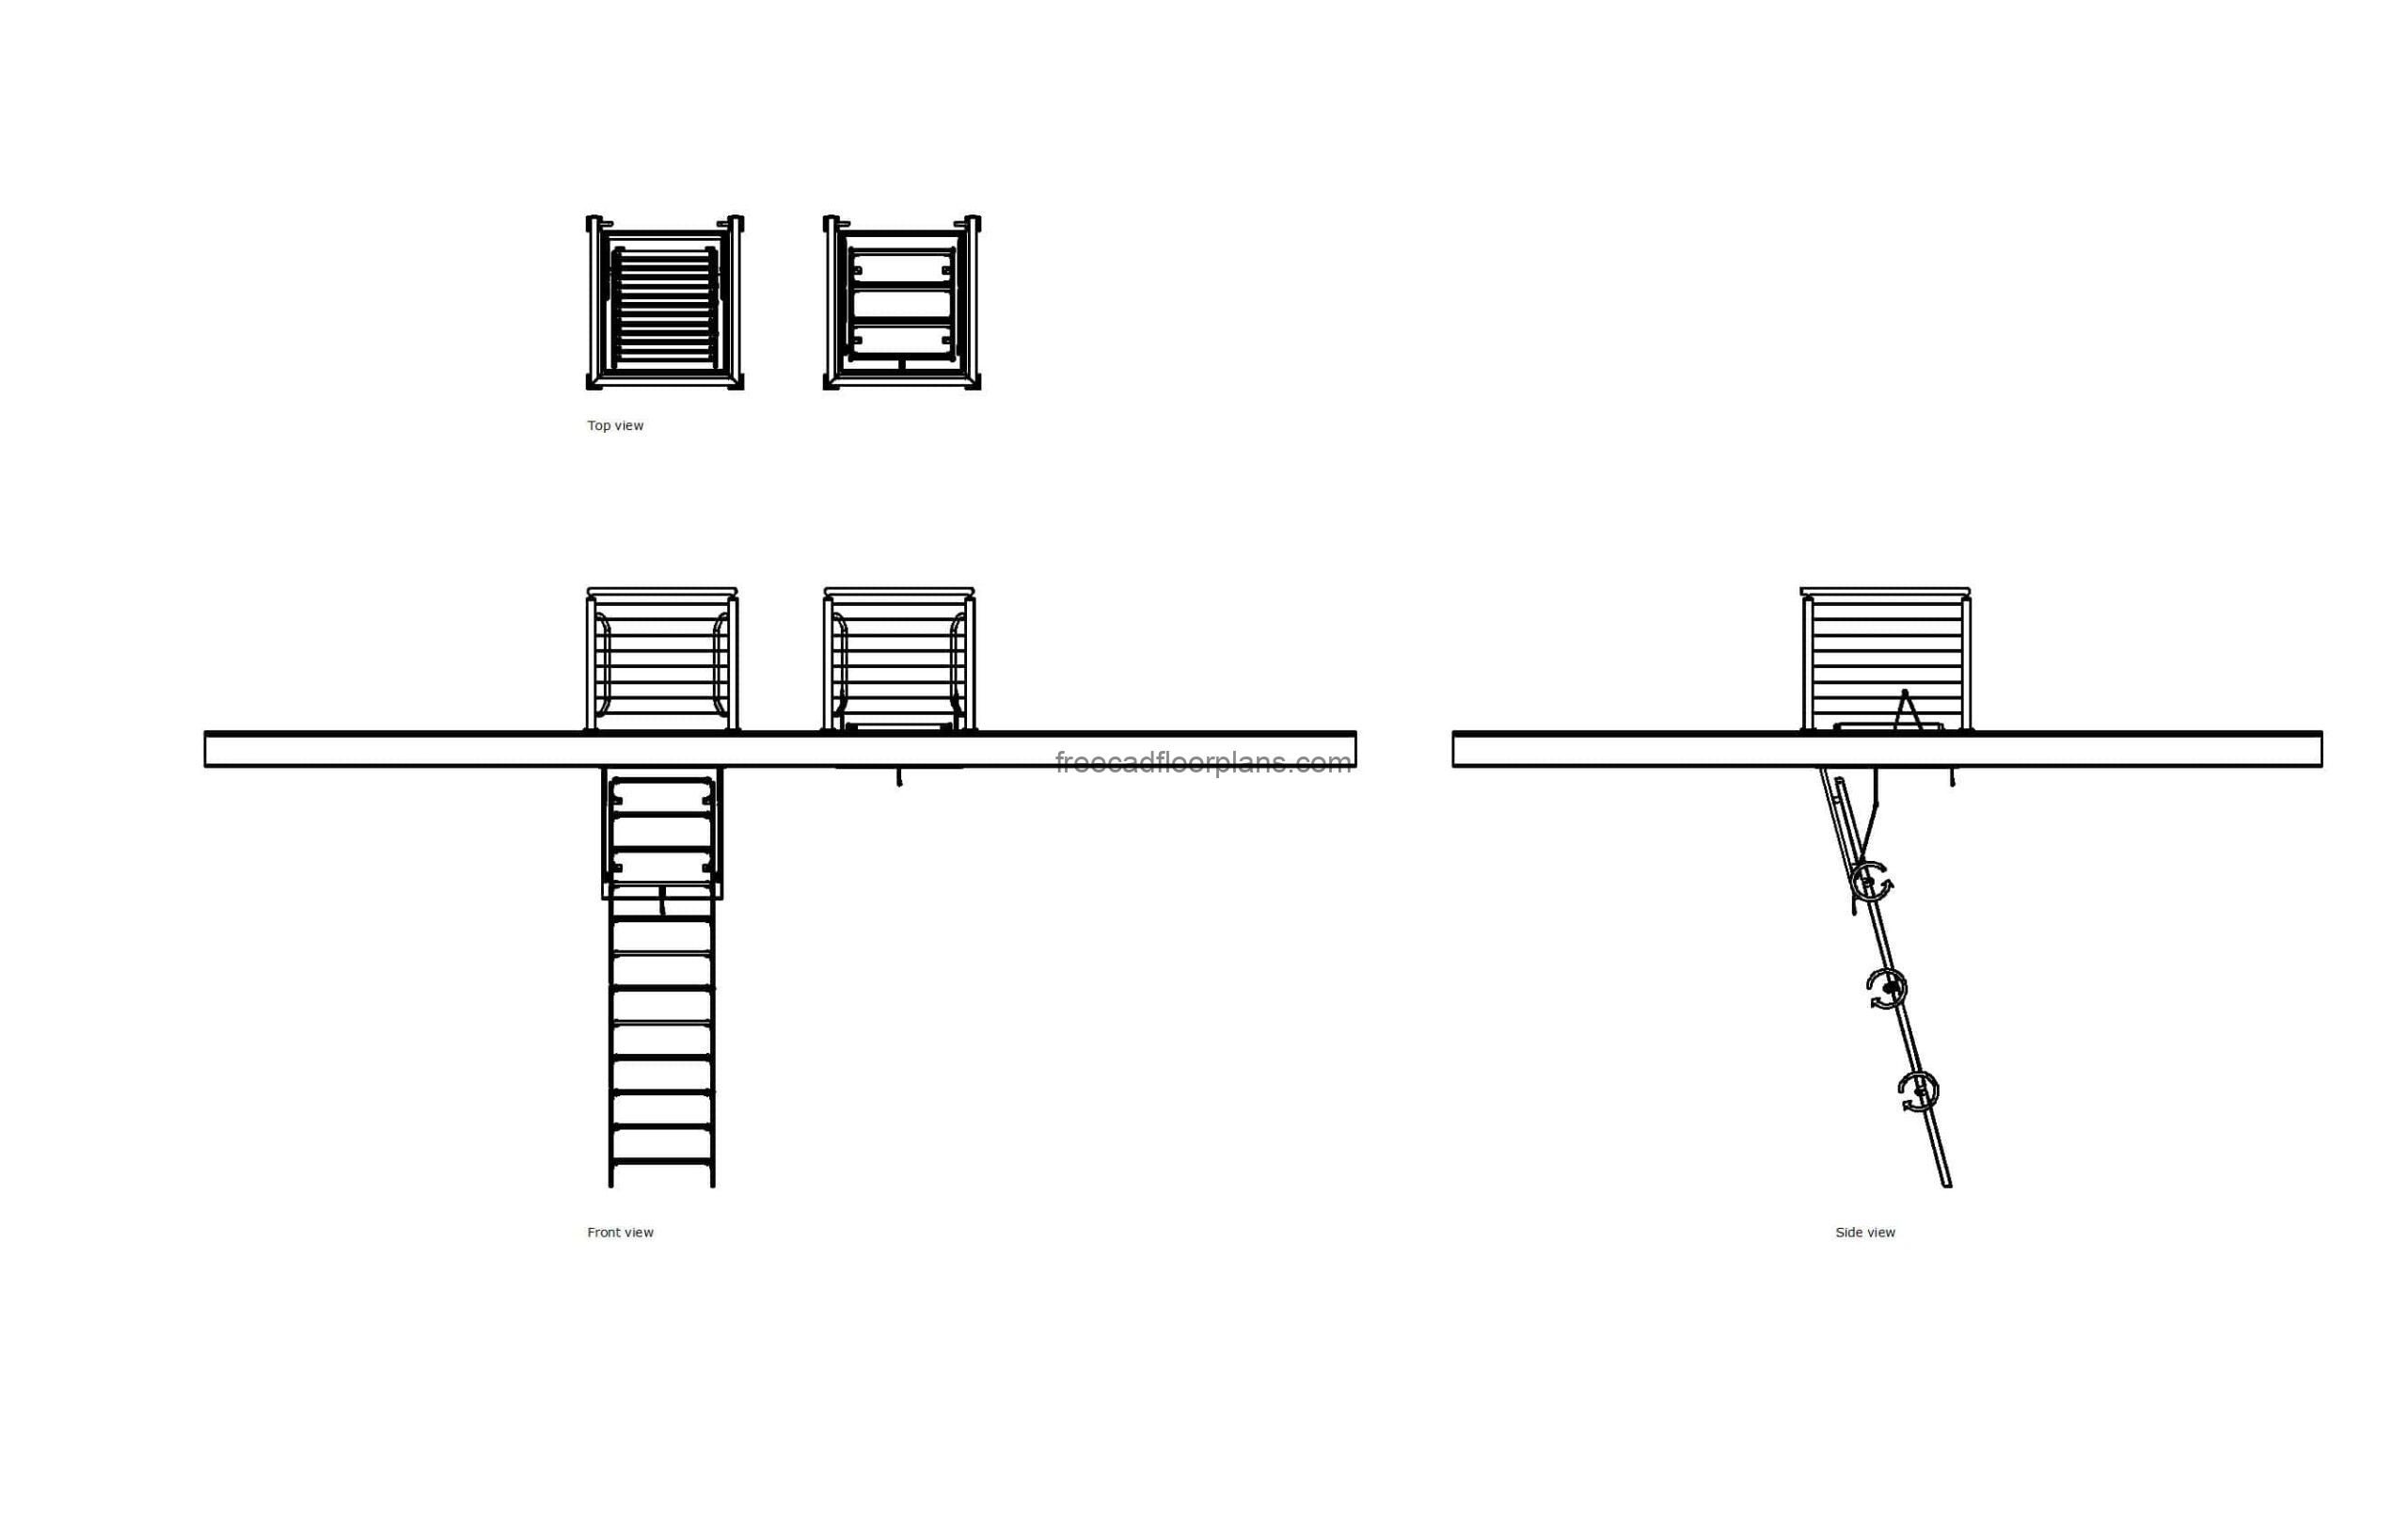 autocad drawing of an attic and loft ladder, plan and elevation 2d views, dwg file free for download